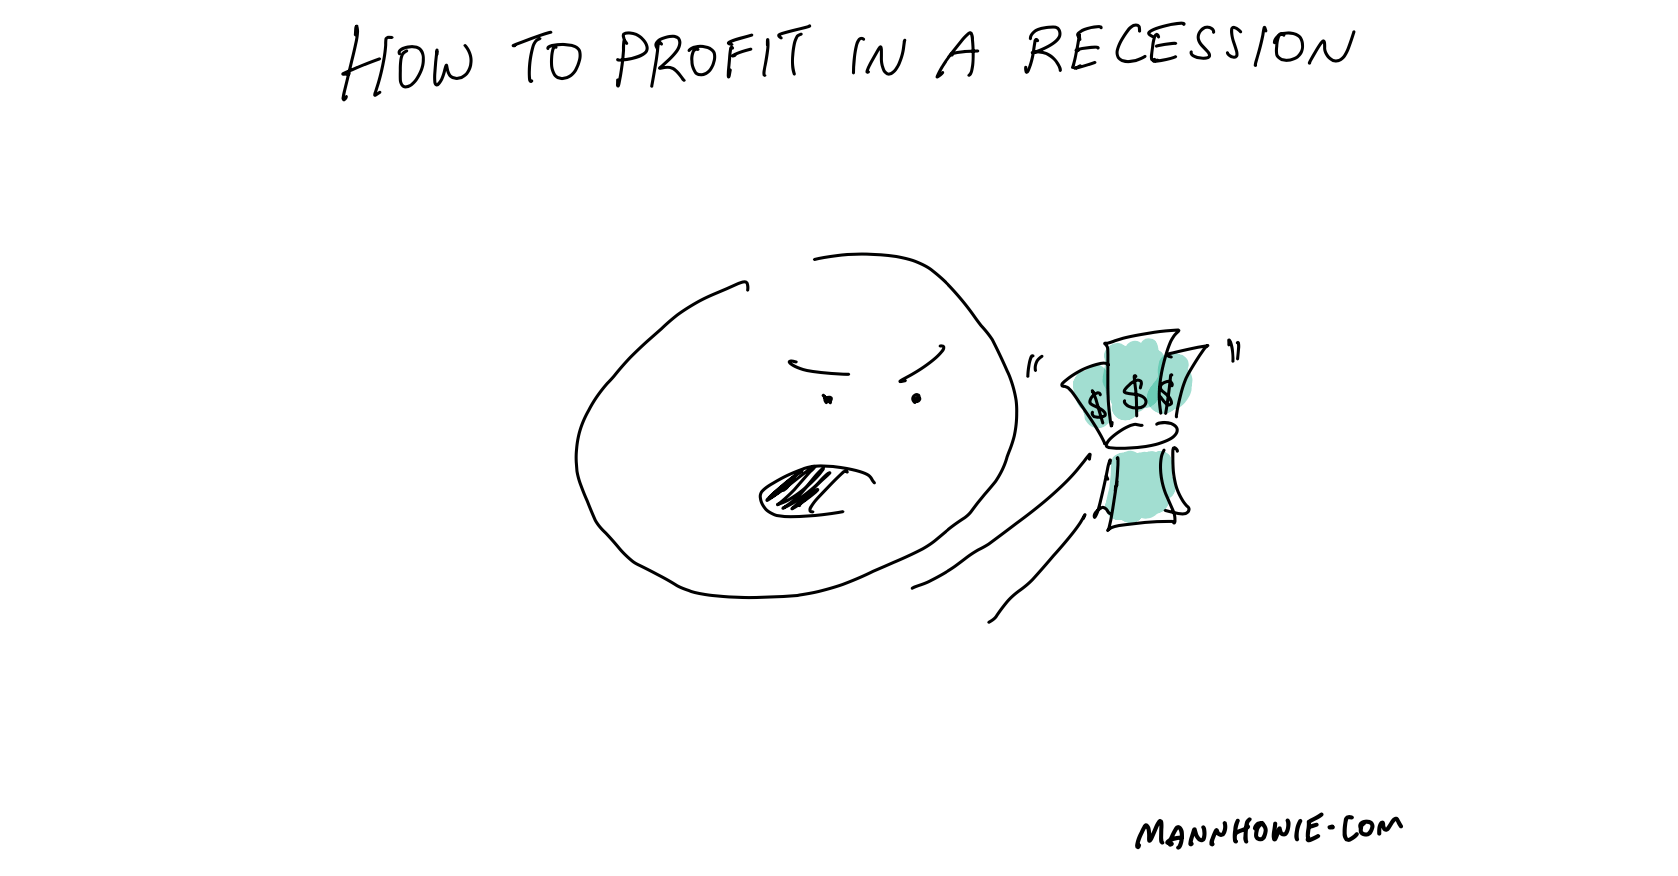 how to profit in a recession